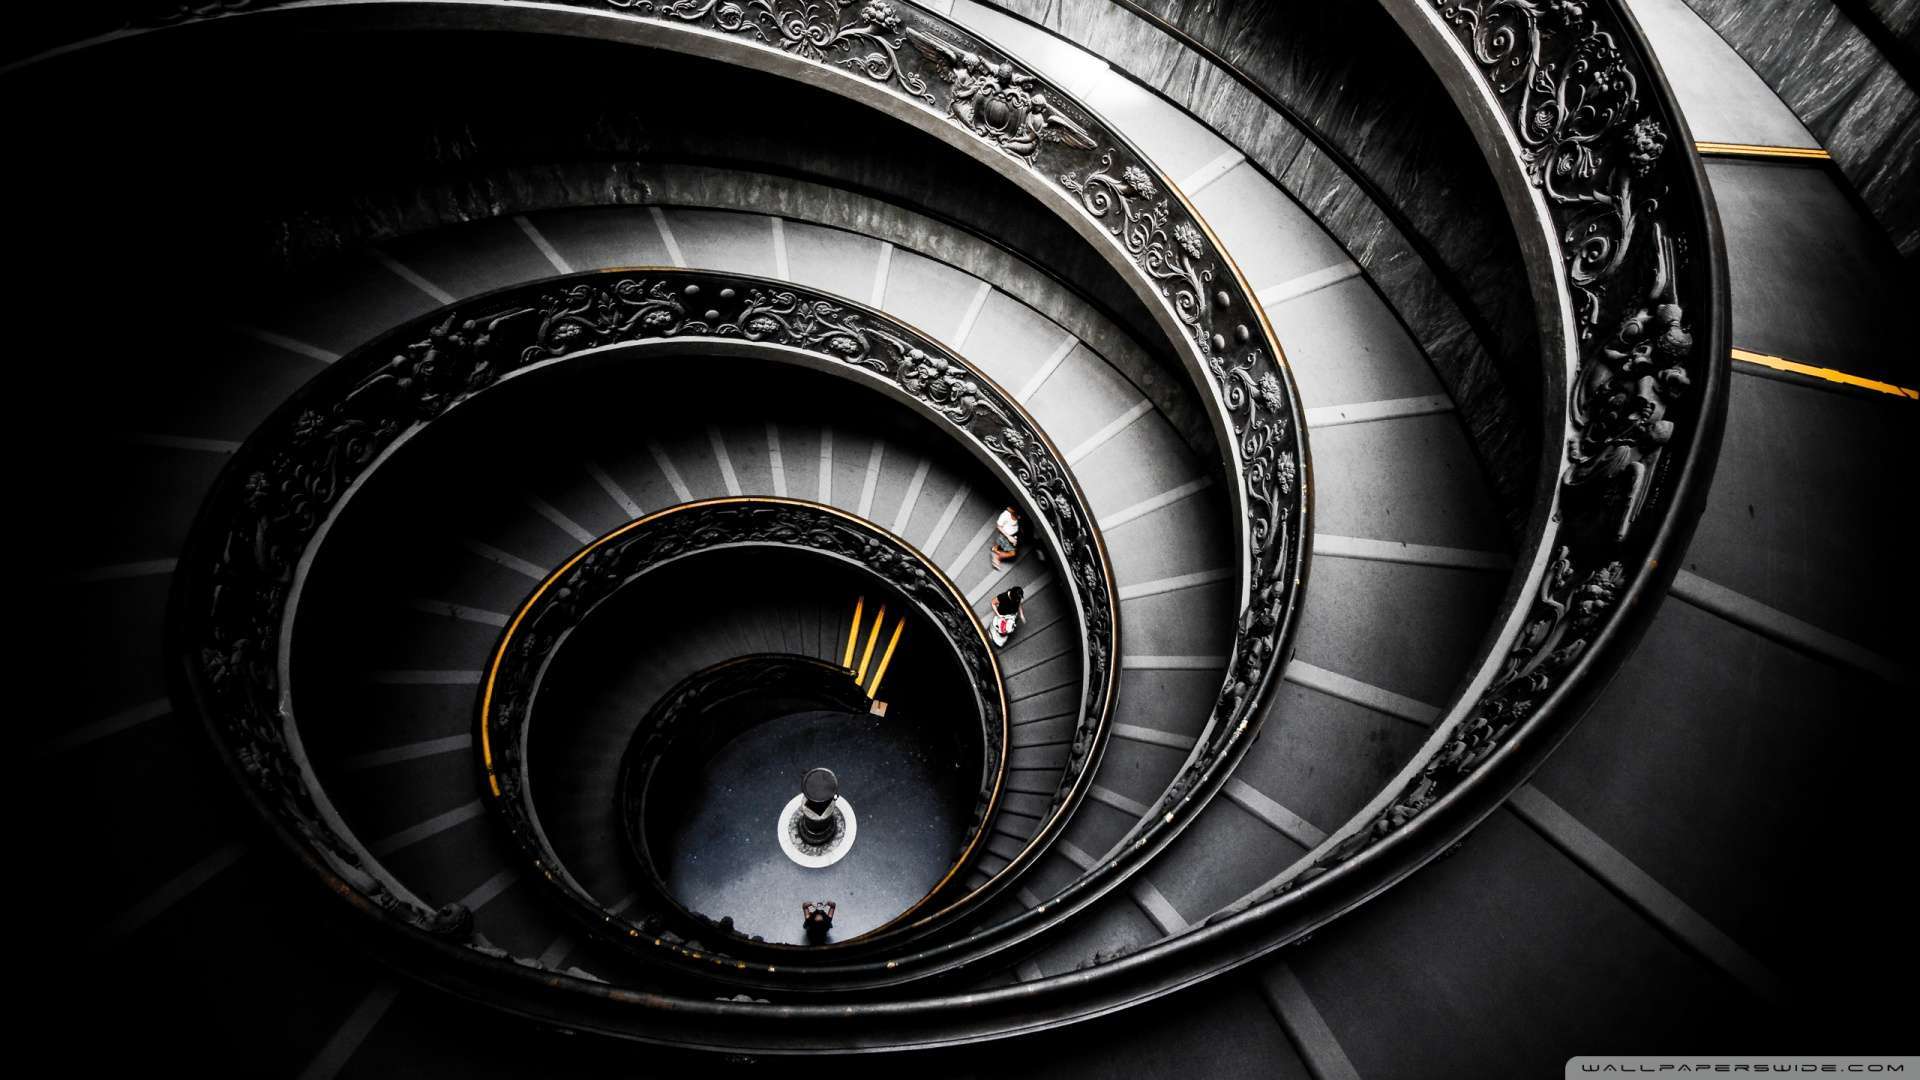 Wallpaper Spiral Stairs Vatican Museums 1080p HD Upload At